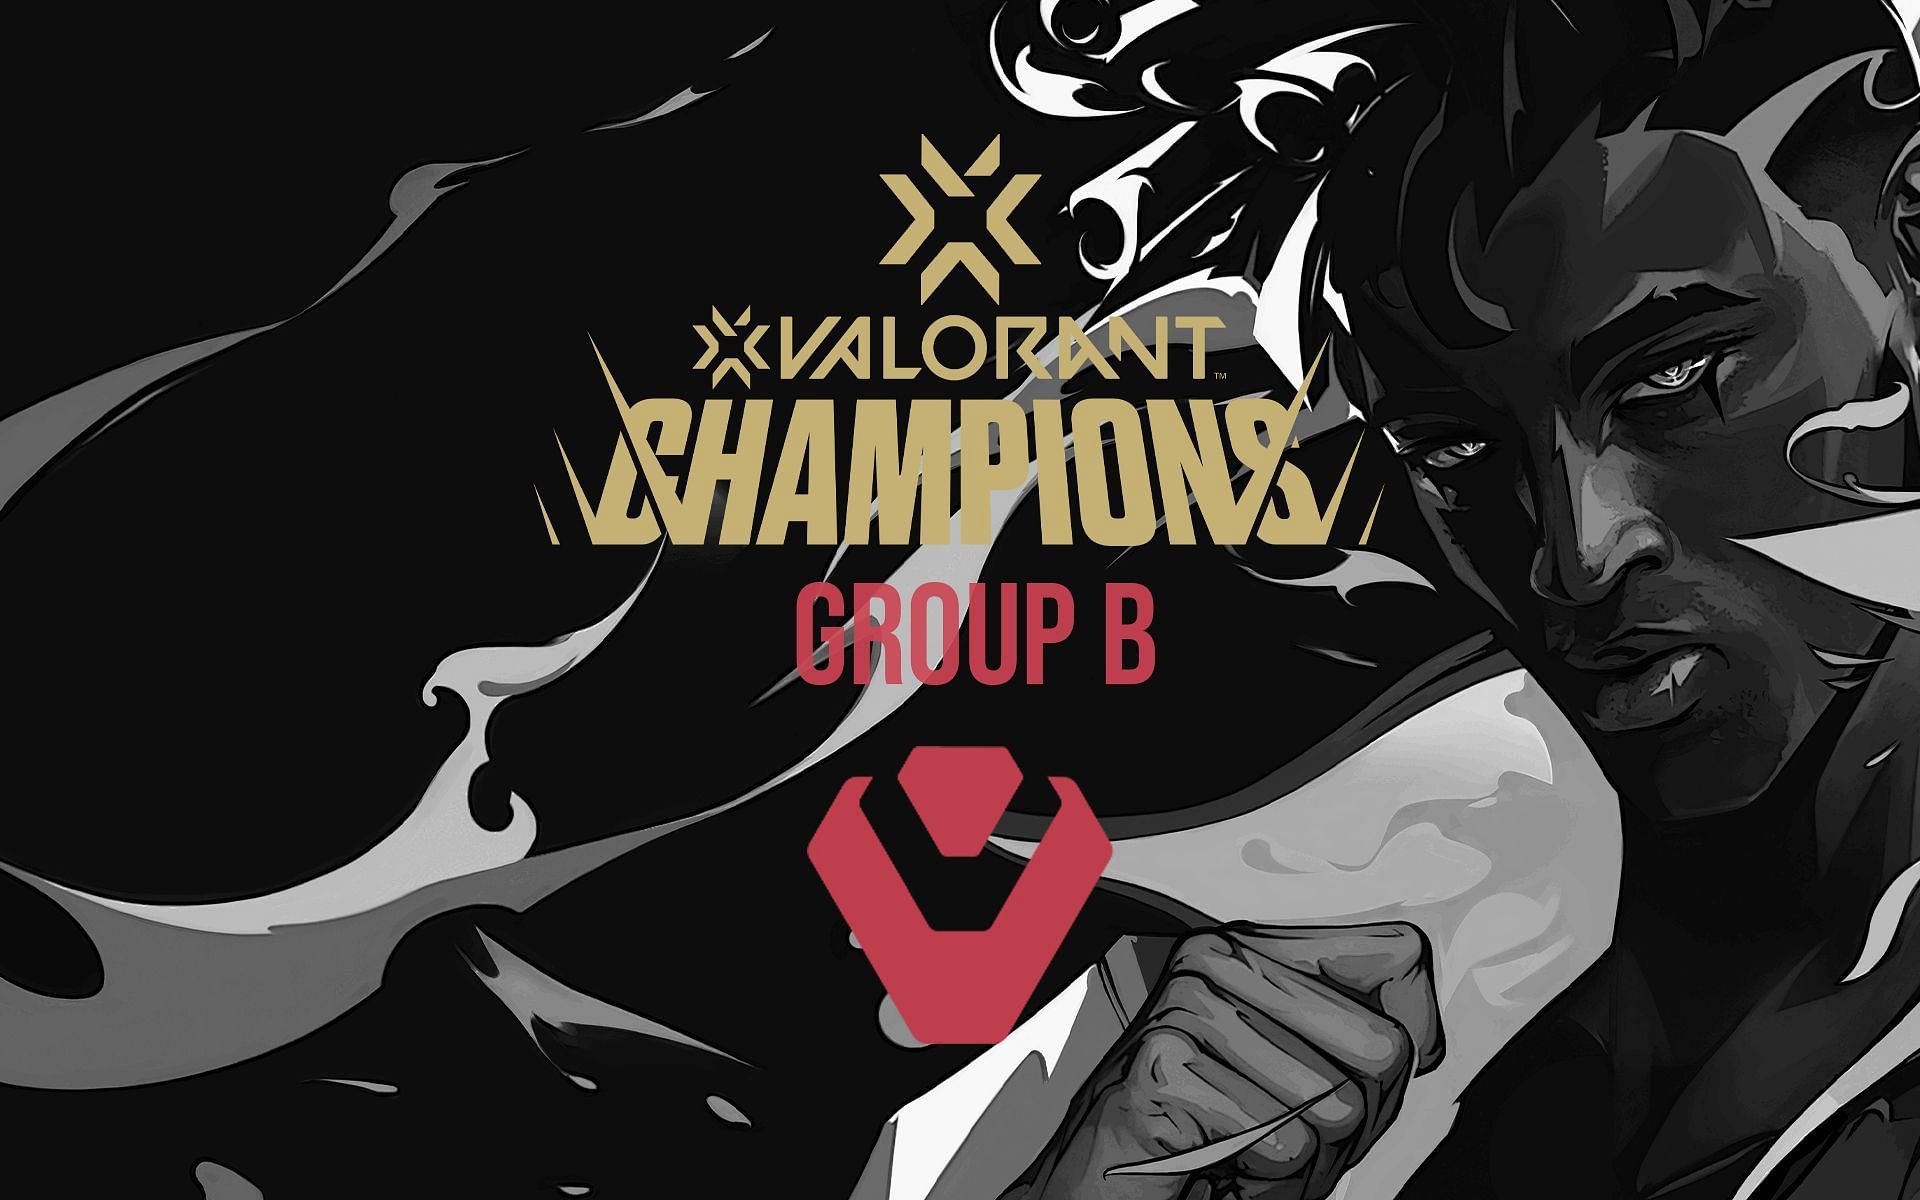 Everything to know about the teams in Group B of Valorant Champions (Image by Sportskeeda)